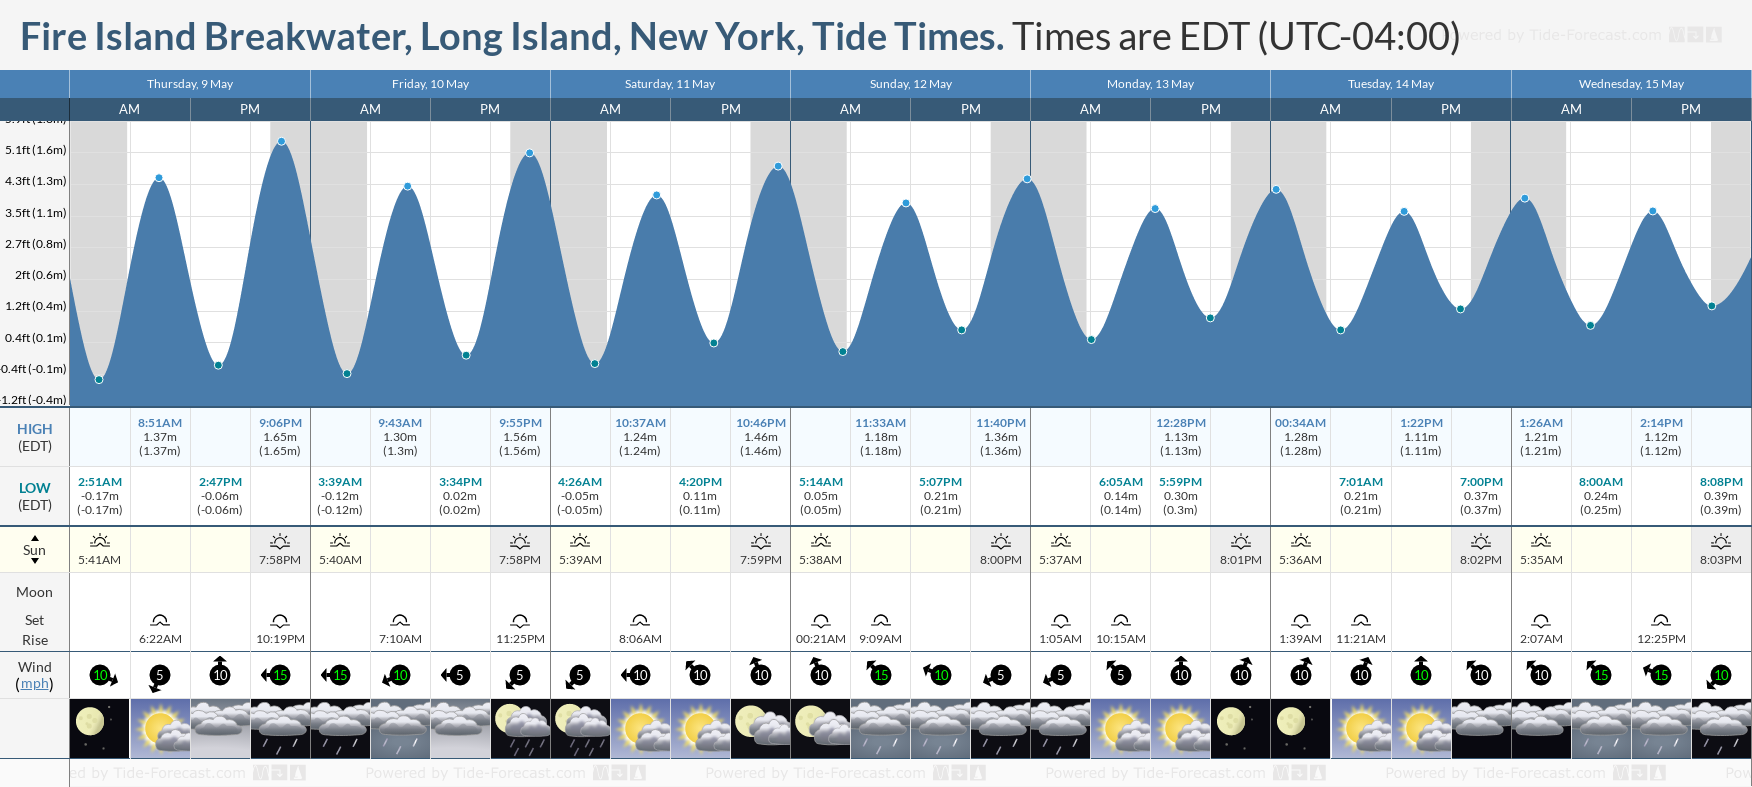 Fire Island Breakwater, Long Island, New York Tide Chart including high and low tide tide times for the next 7 days